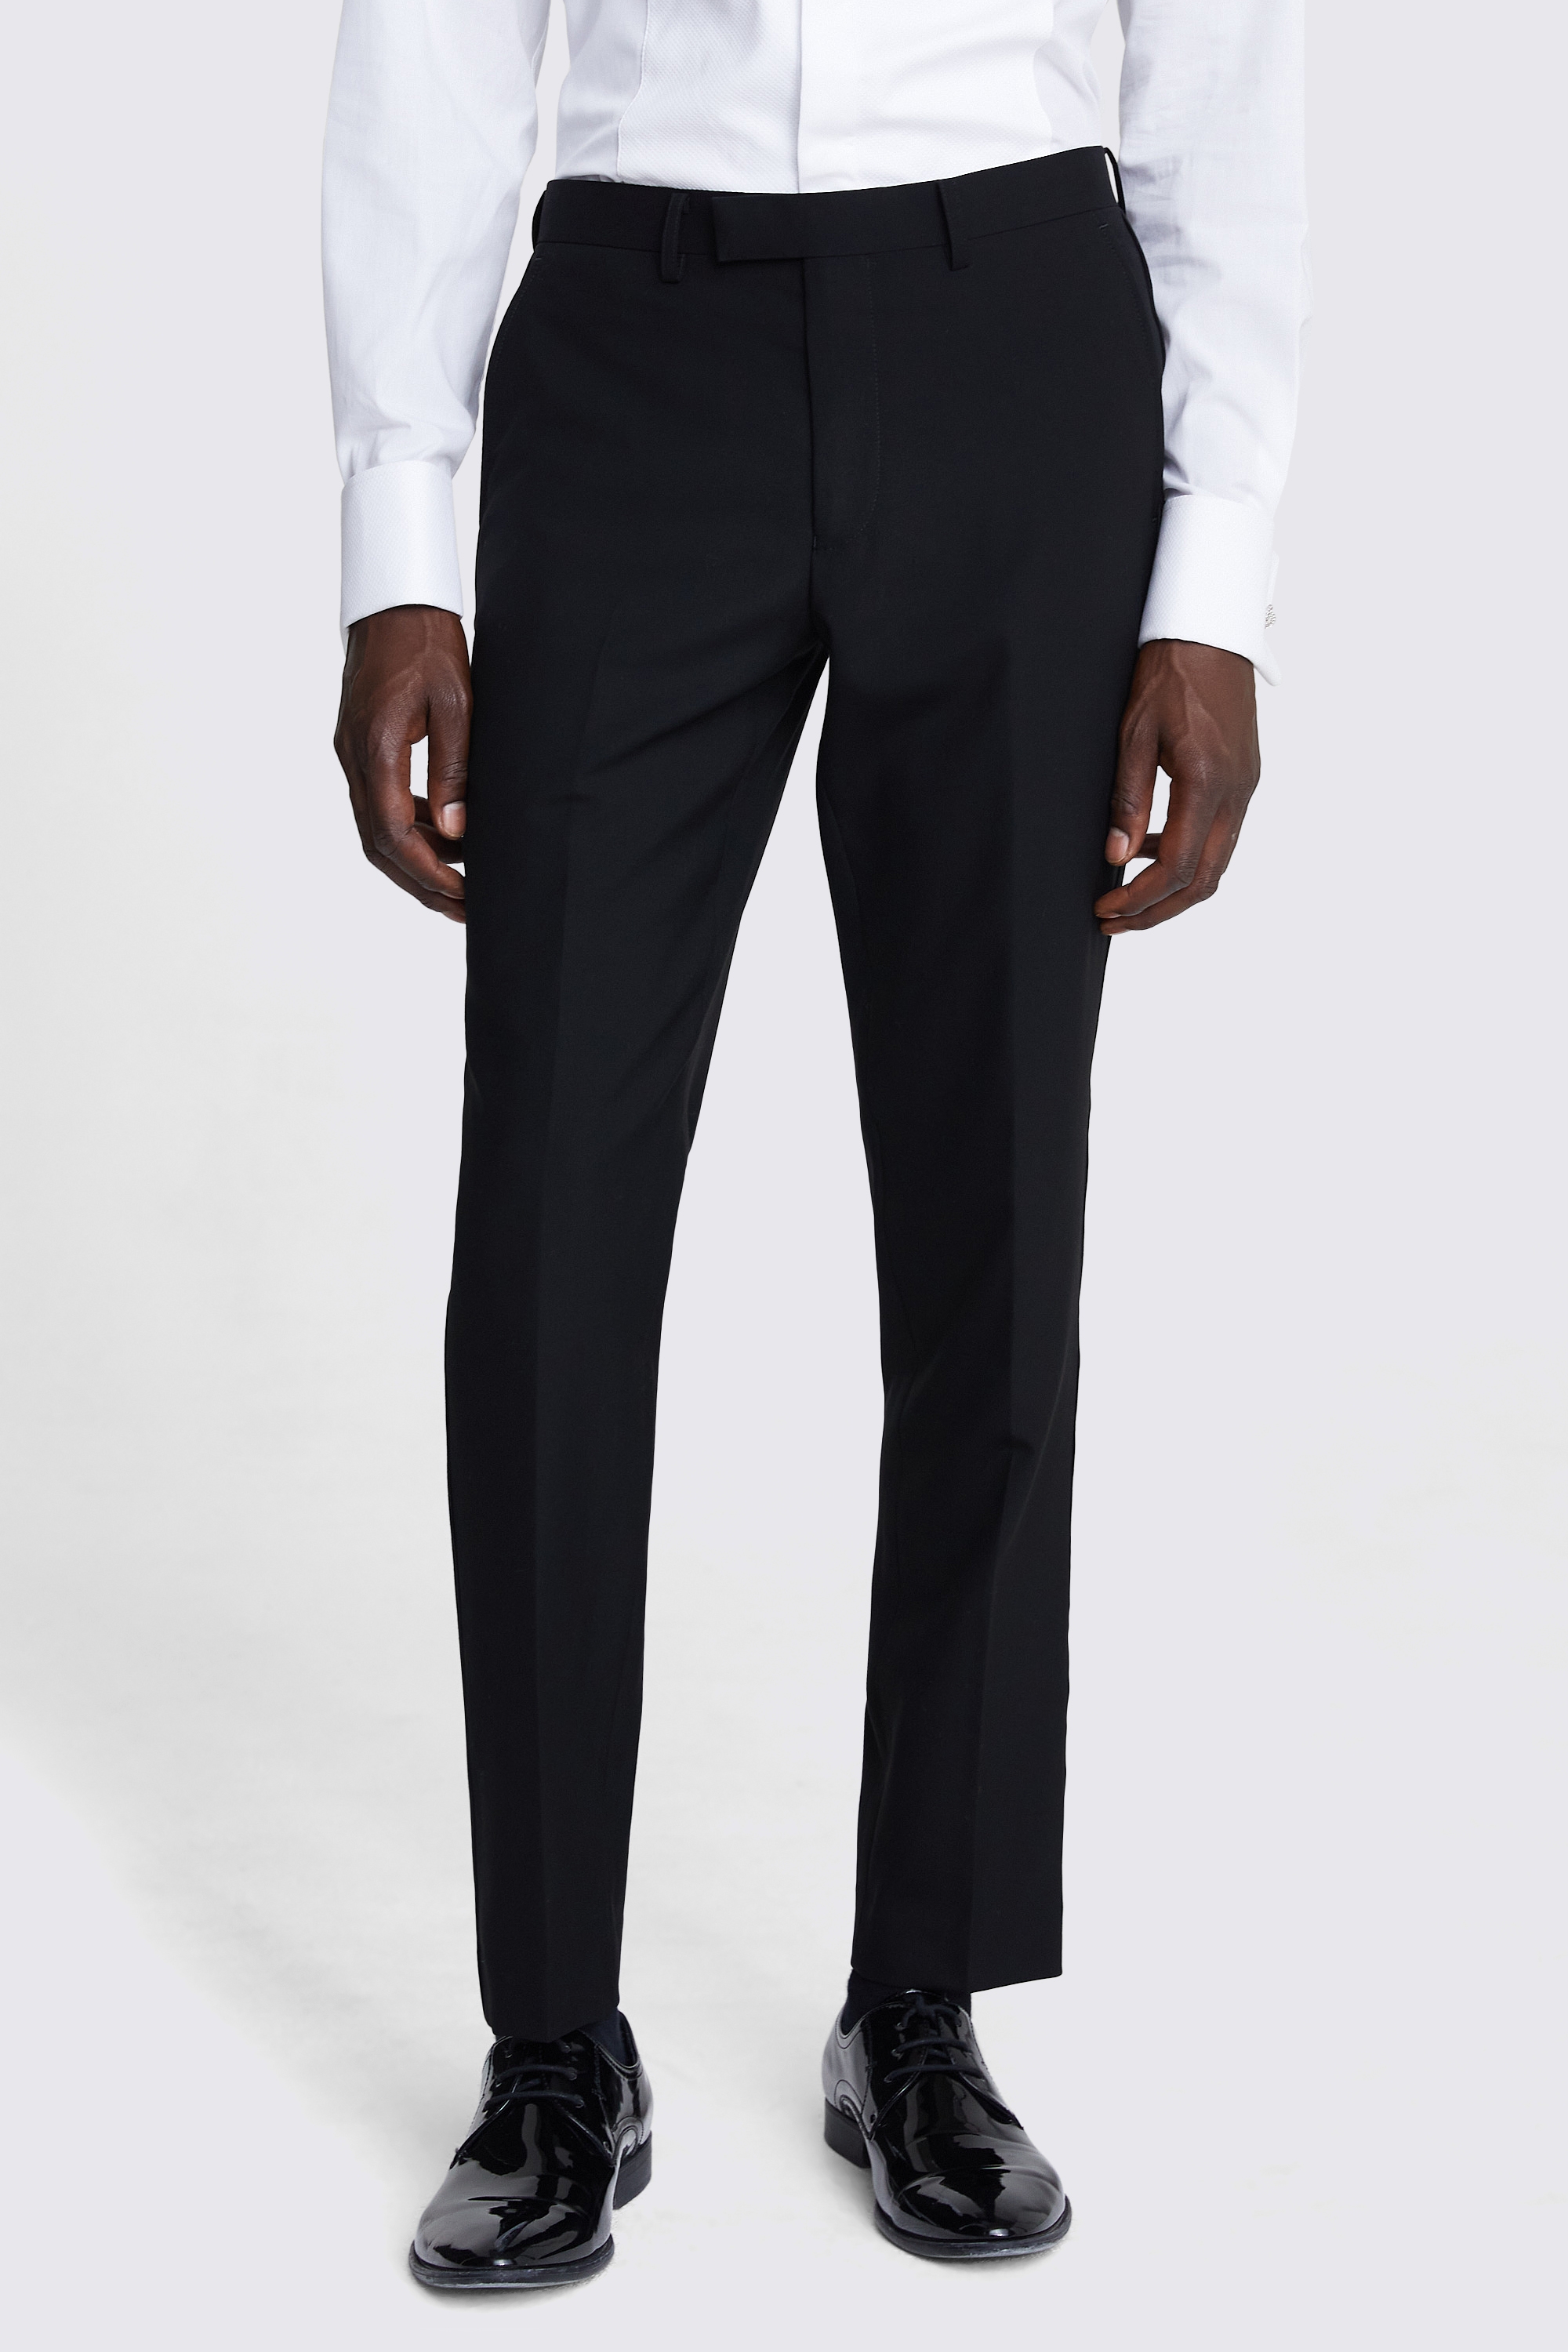 Tailored Fit Black Dress Trousers | Buy Online at Moss